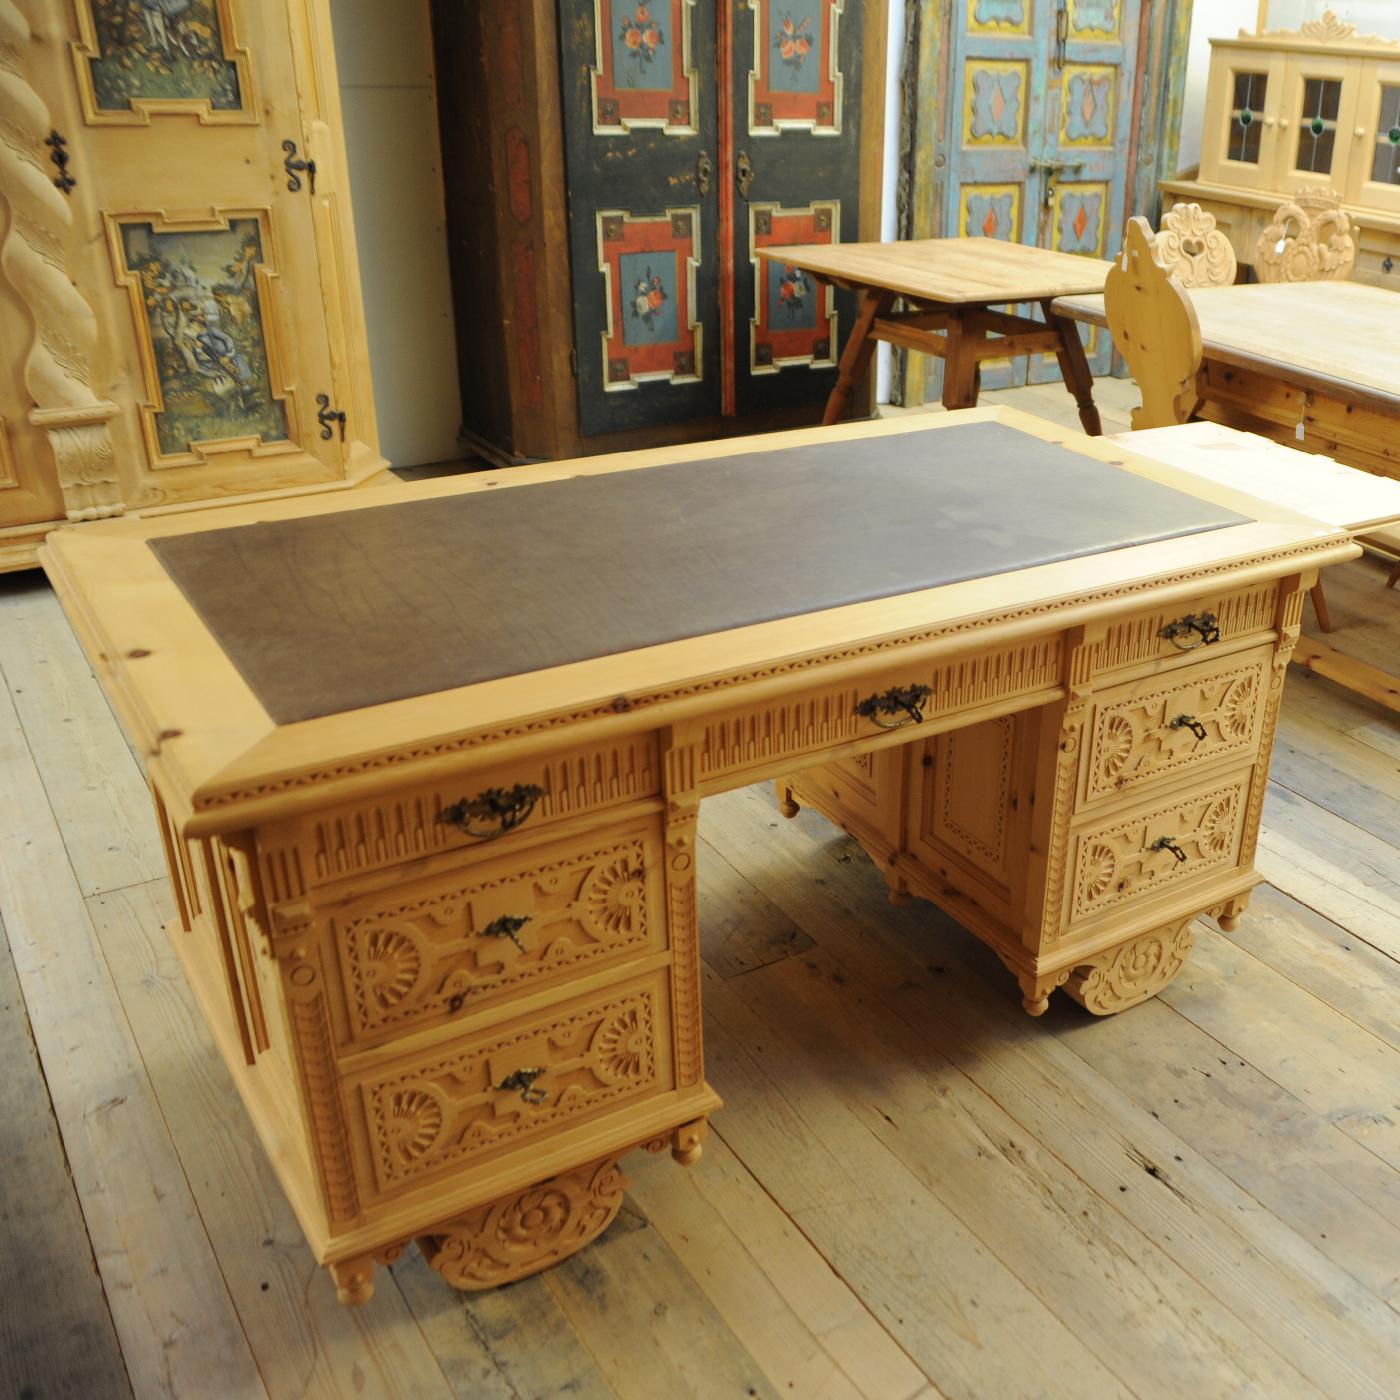 An imposing piece of functional decor that will make a statement in a study or office, this desk can be used on both sides, thanks to the stunning series of bas-relief decorations carved by hand that grace both fronts. Its large size allows it to be